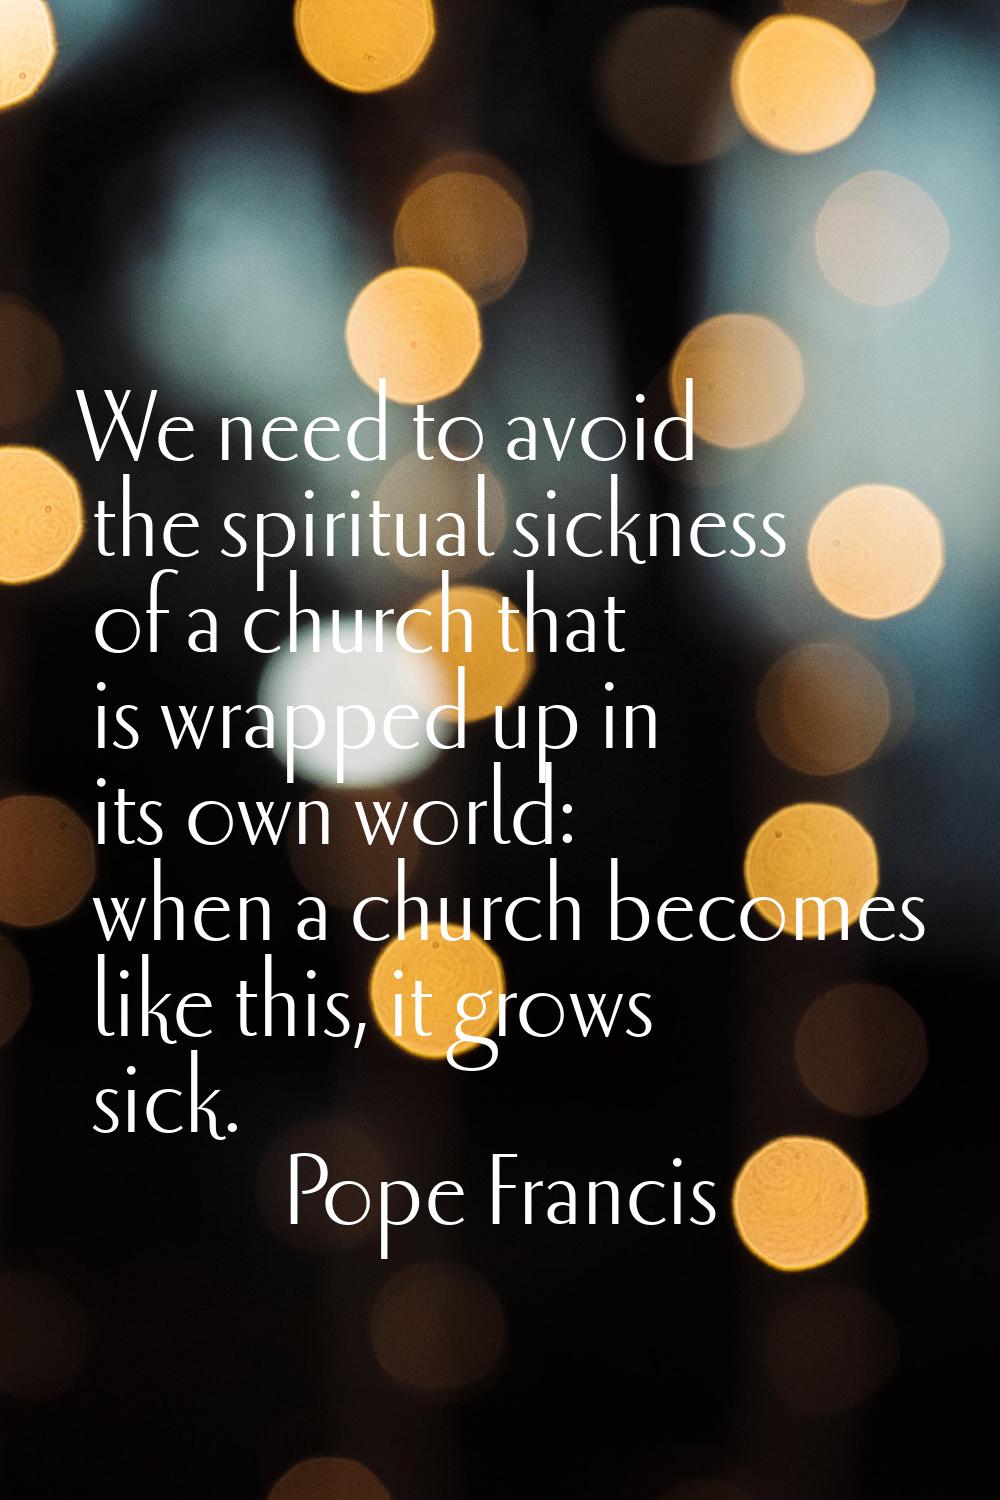 We need to avoid the spiritual sickness of a church that is wrapped up in its own world: when a chu